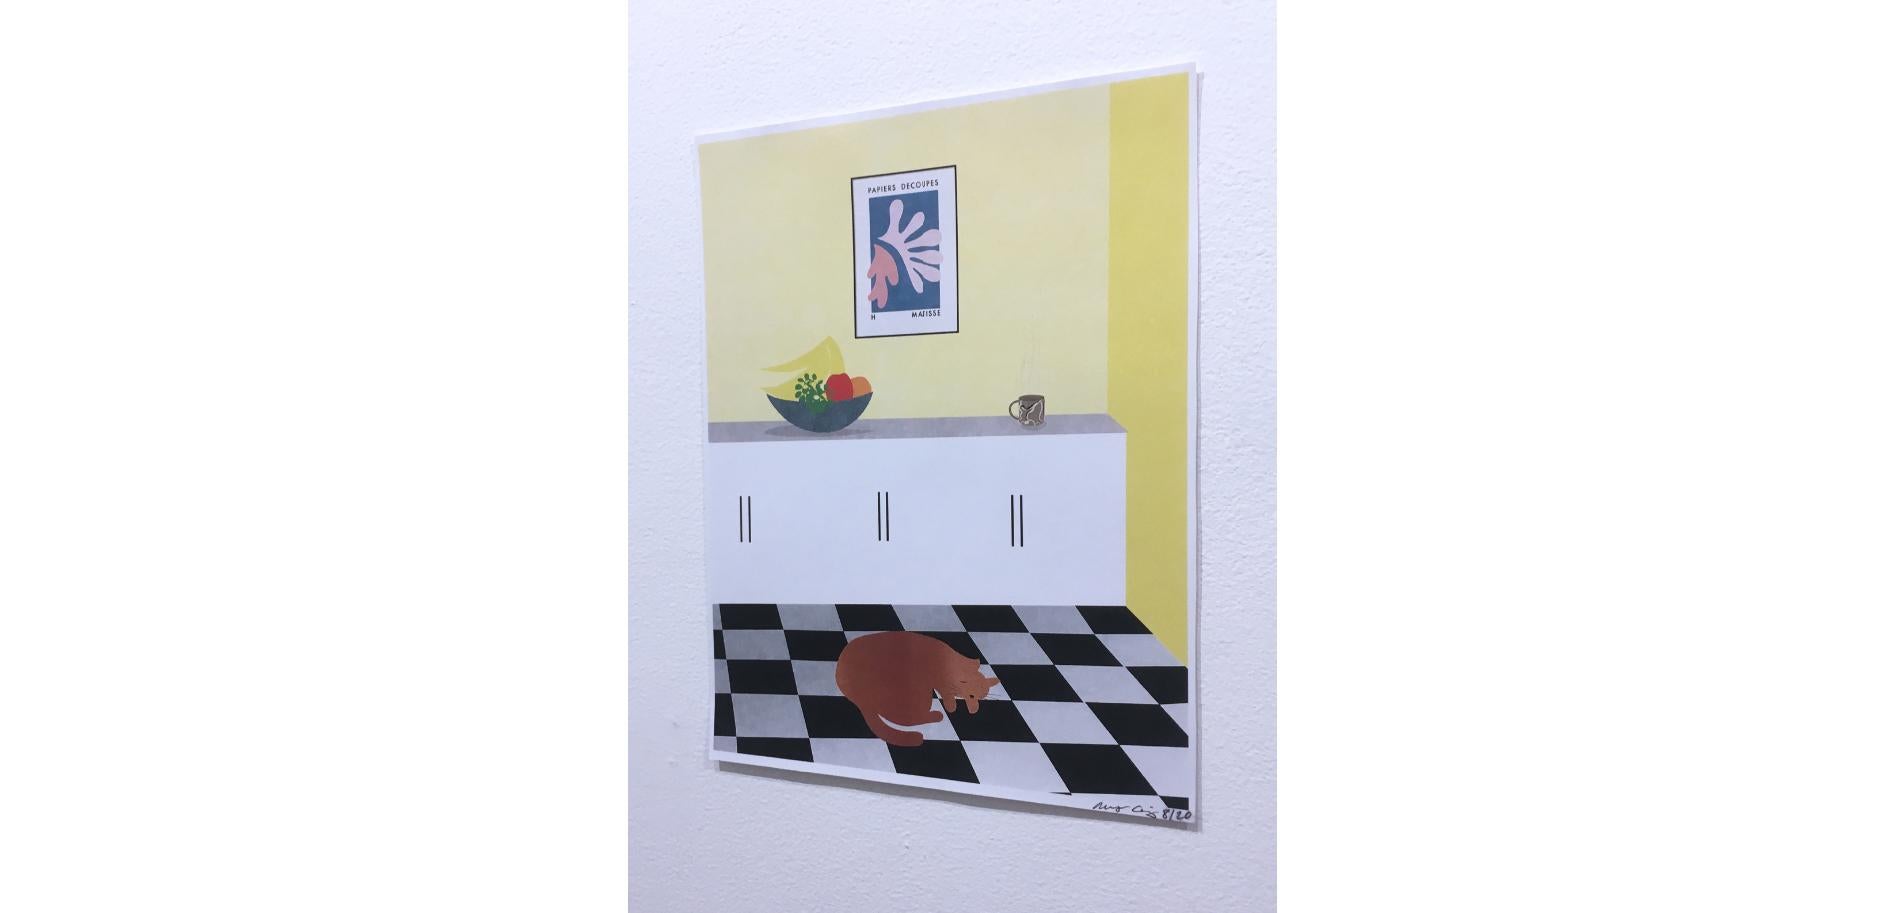 Kitchen Cat, Digital Painting Print, Interiors, Still Life, Fruit Bowl, Yellow  For Sale 1